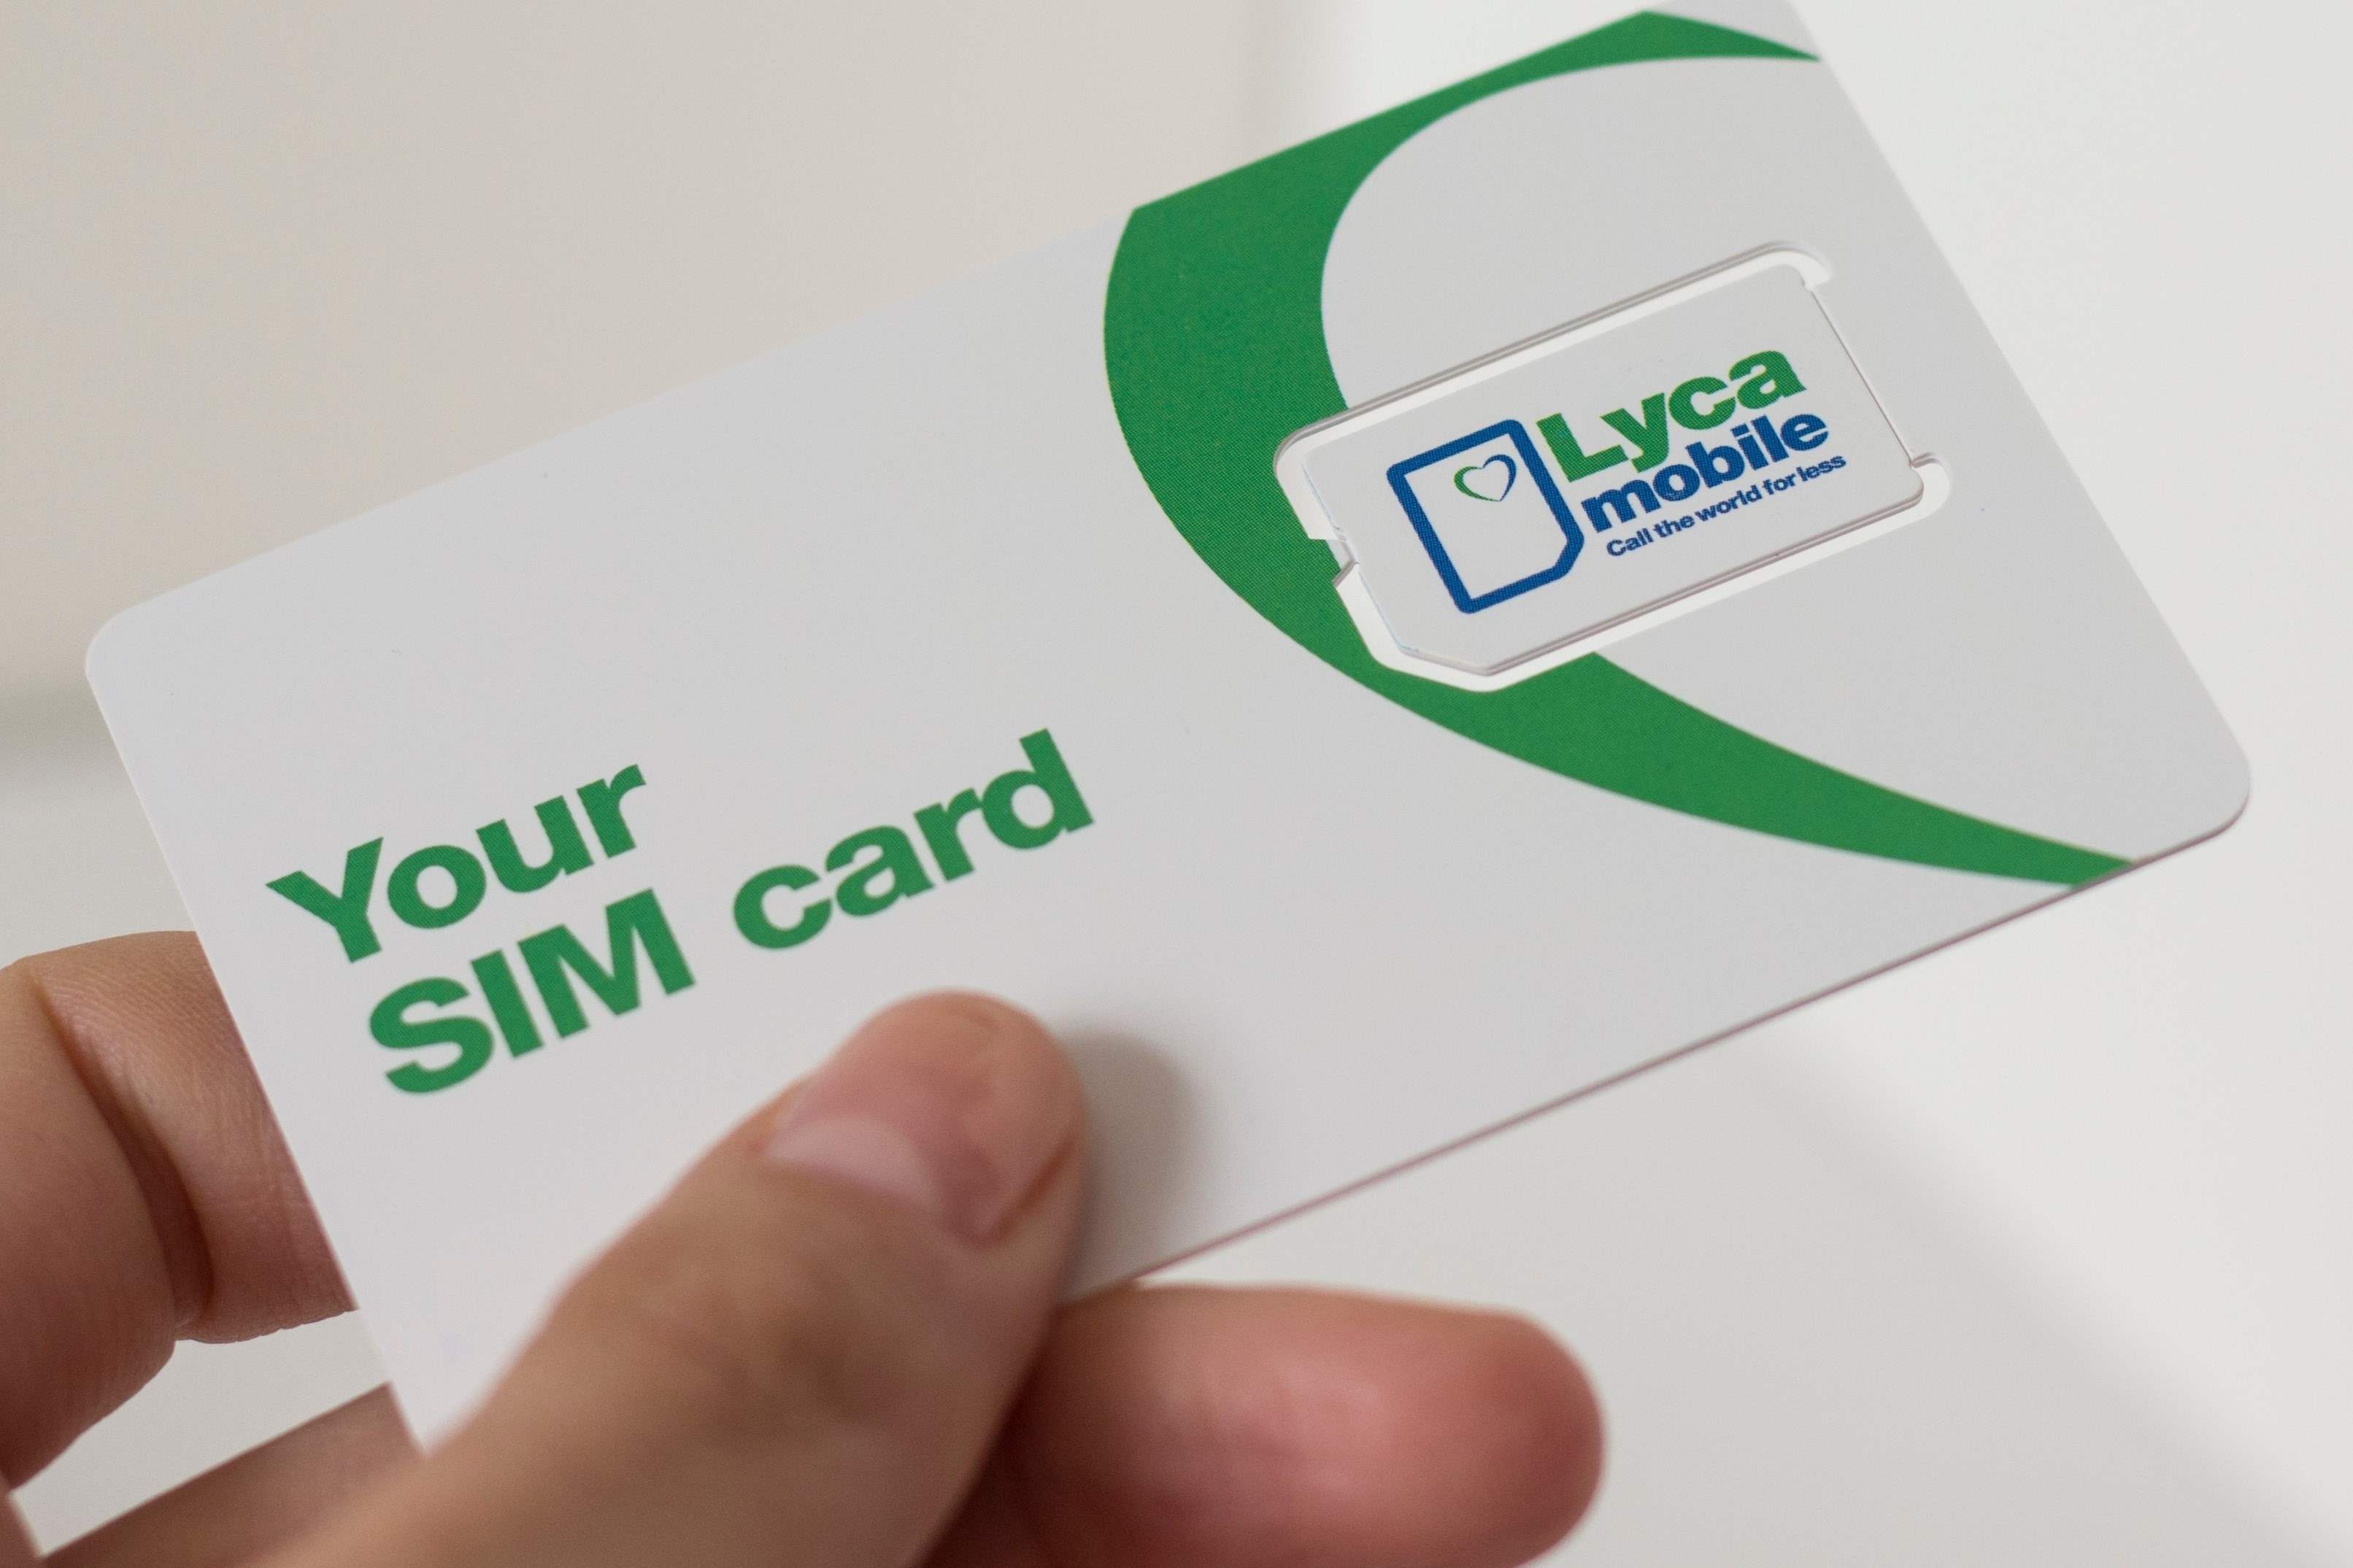 Activating Lycamobile SIM Card: A Step-by-Step Guide